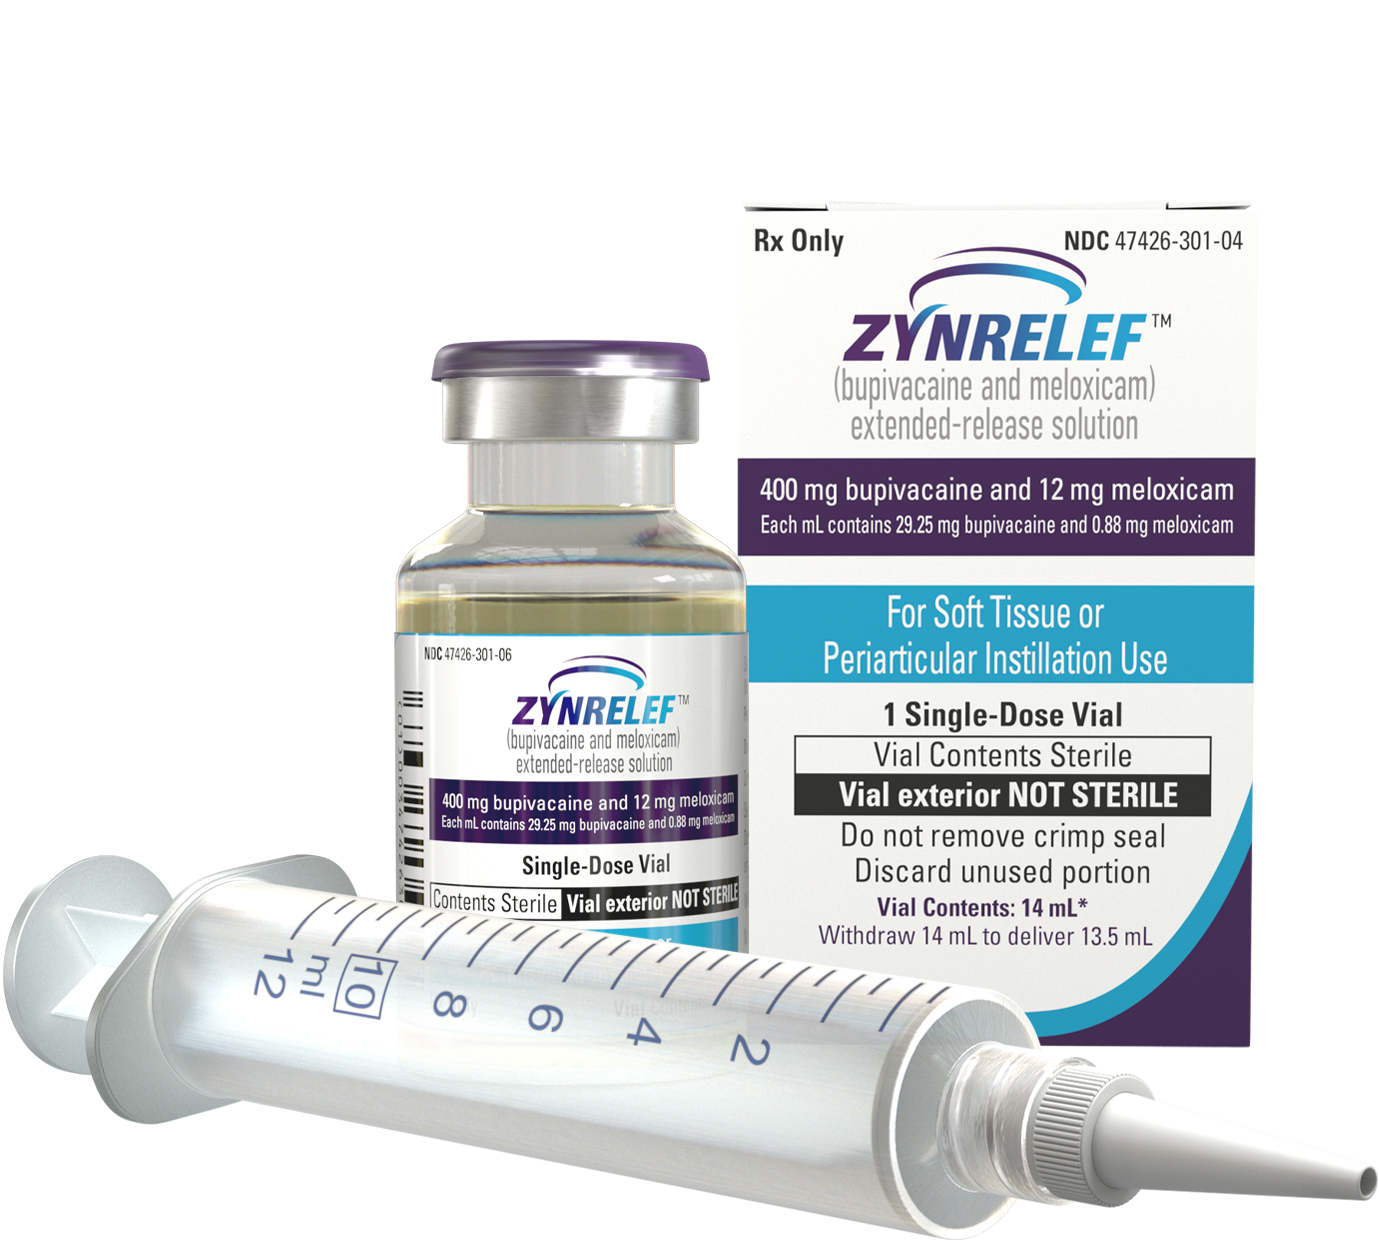 FDA Significantly Expands Indication for Zynrelef Analgesia